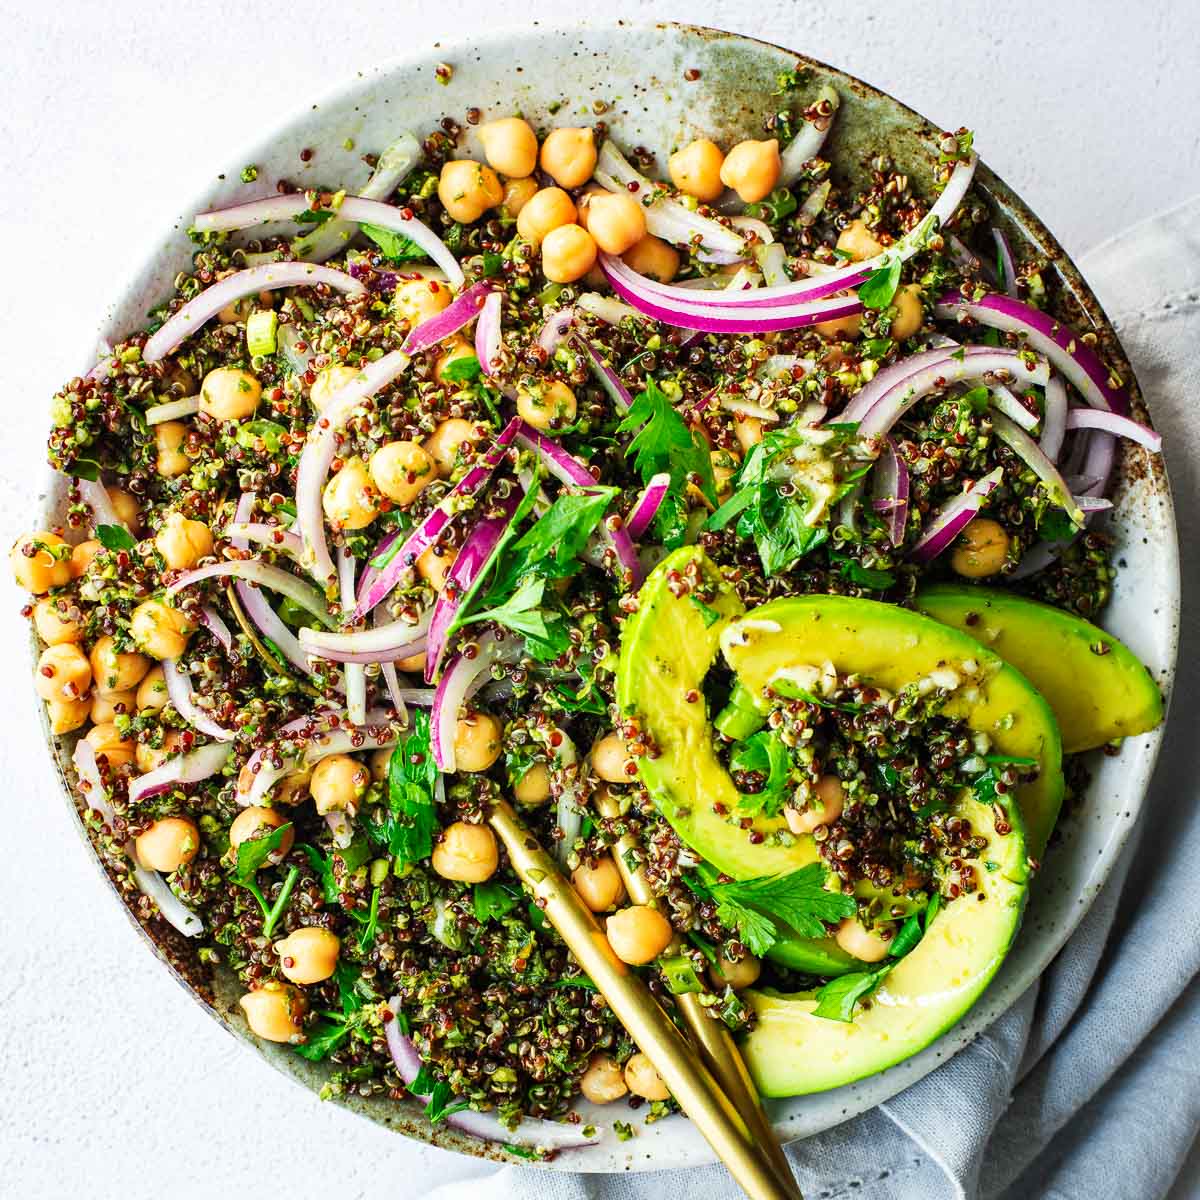 Quinoa salad with basil, kale and almond pesto topped with avocado and a lemon dressing.